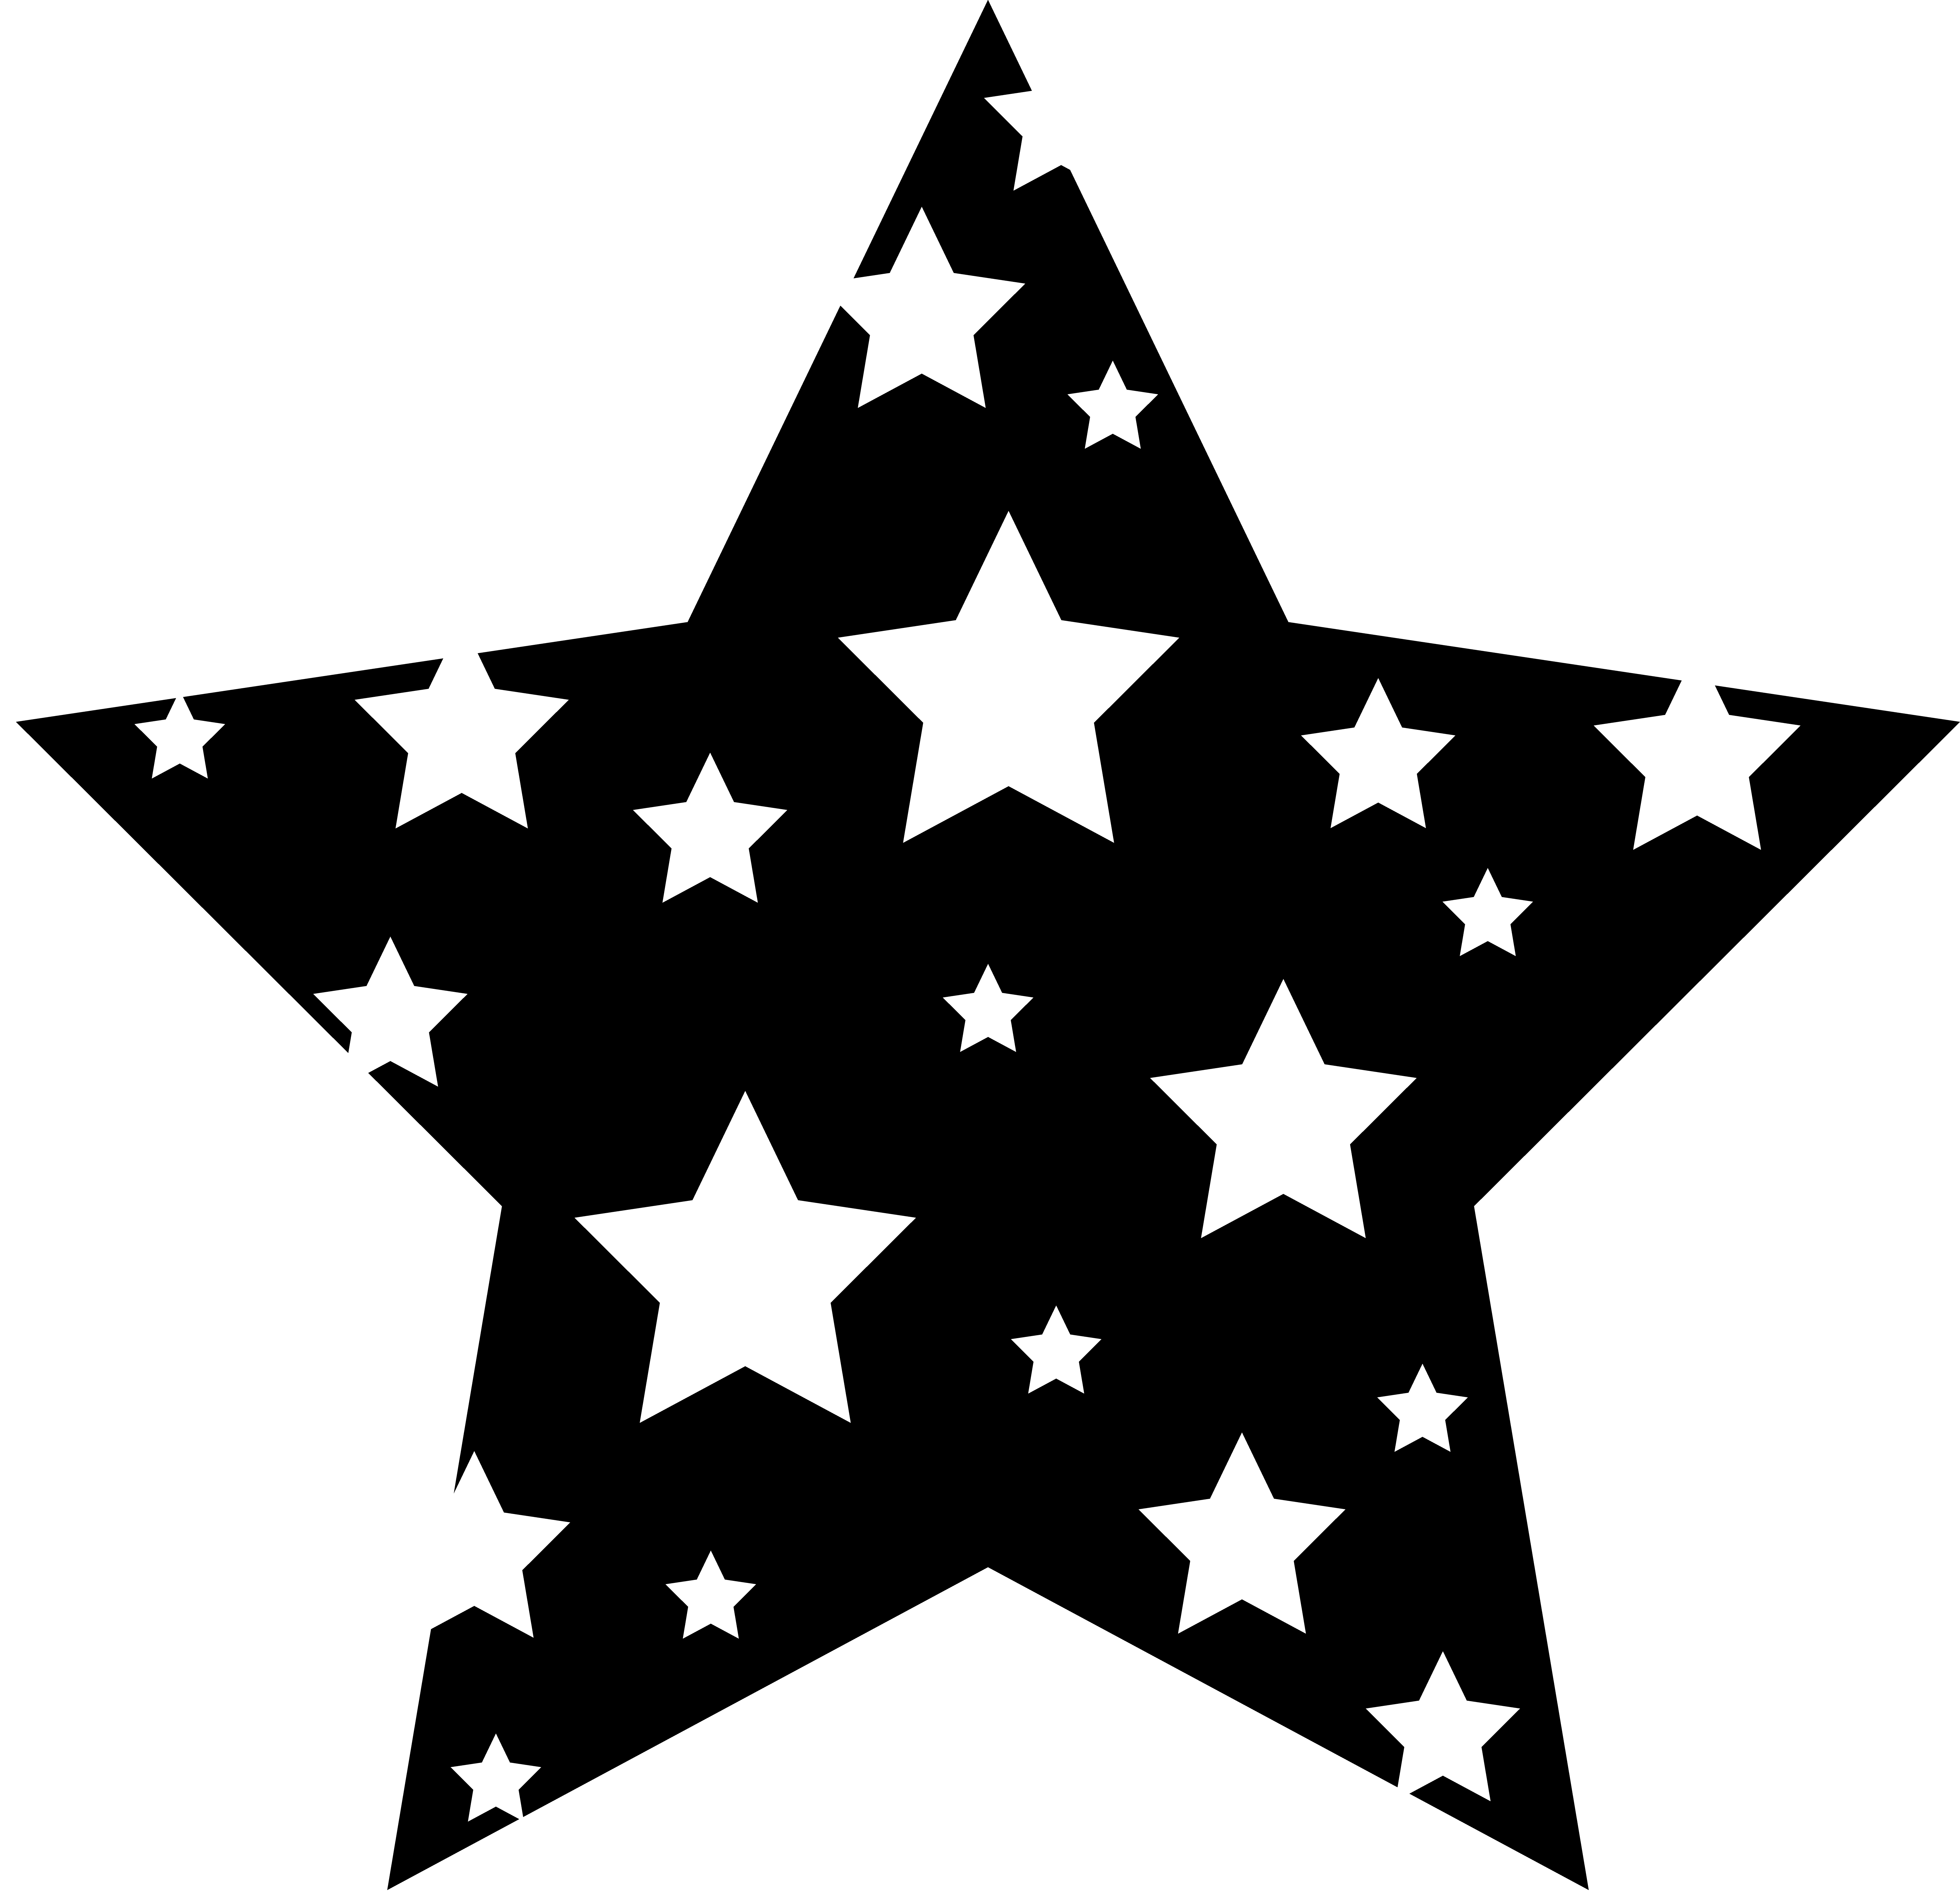 Red and White Star Logo - Free Pictures Of White Stars, Download Free Clip Art, Free Clip Art ...